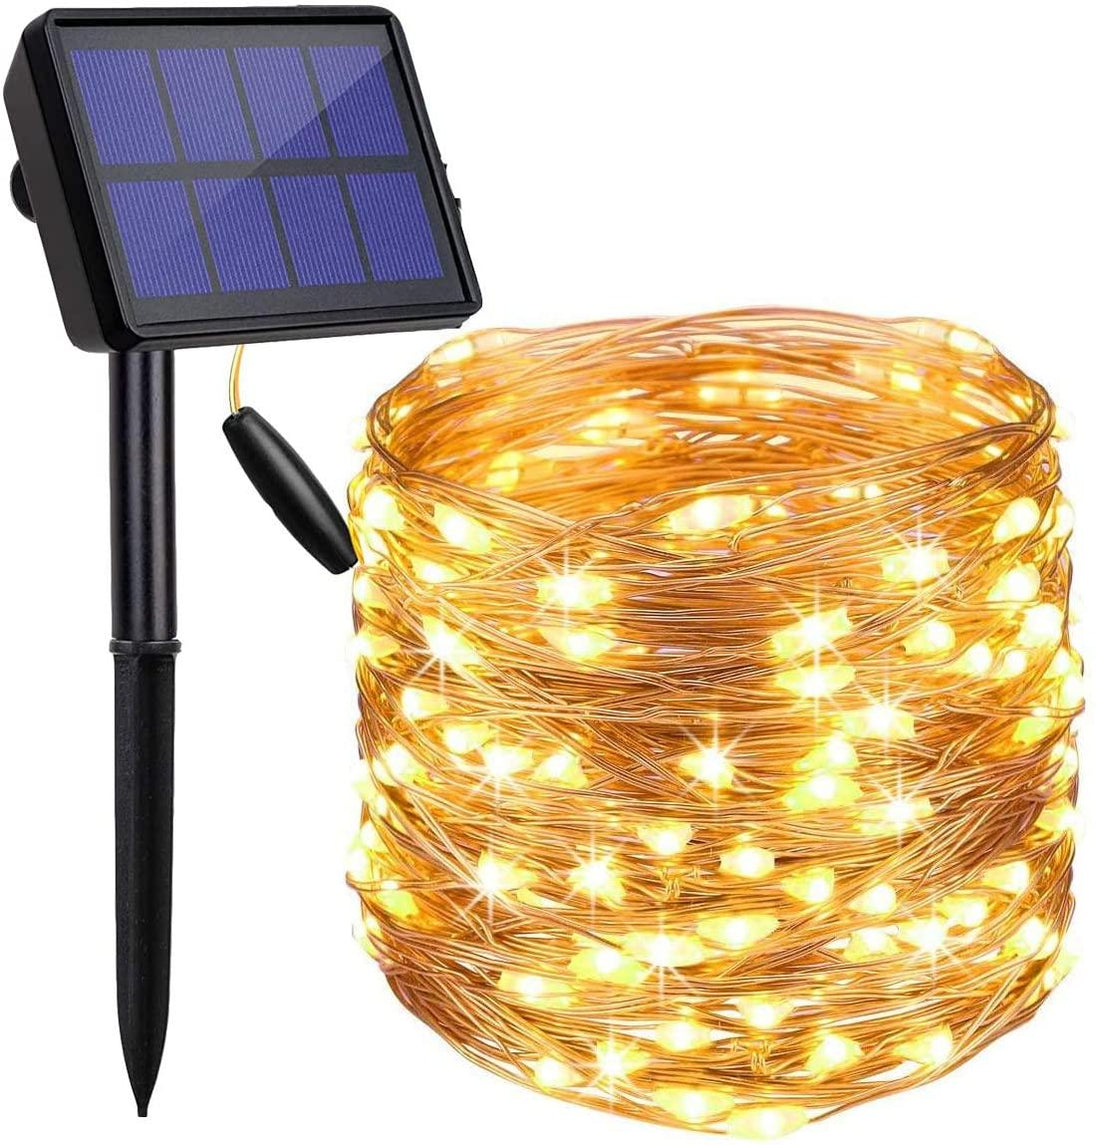 Buy 200 Waterproof LED Solar Fairy Light Outdoor with 8 Lighting Modes for Home,Garden and Decoration discounted | Products On Sale Australia